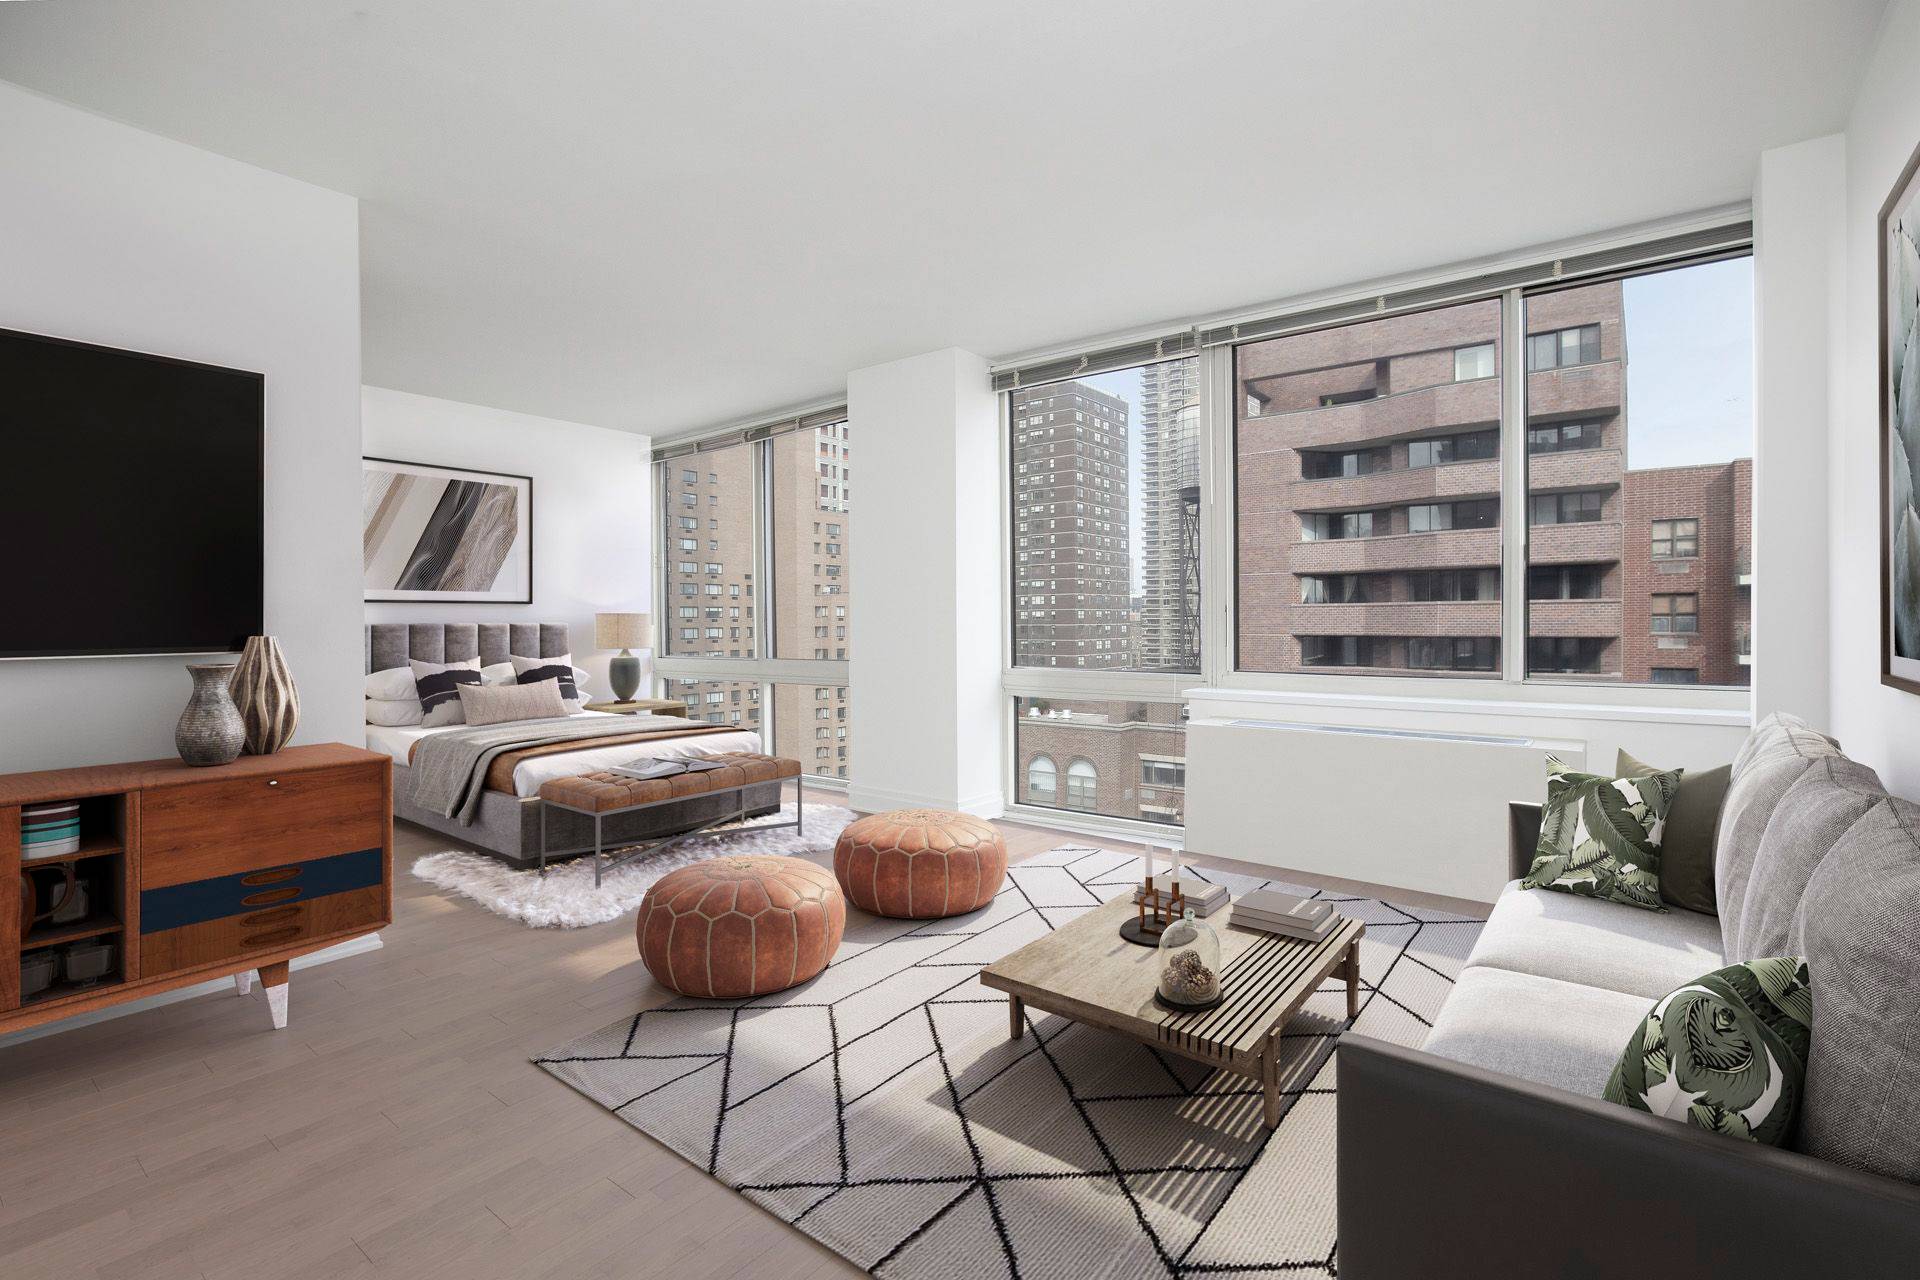 This stunning 25 story glass, steel, limestone and brick Upper East Side apartment building offers studio, one and two bedroom apartments, some of which feature terraces.